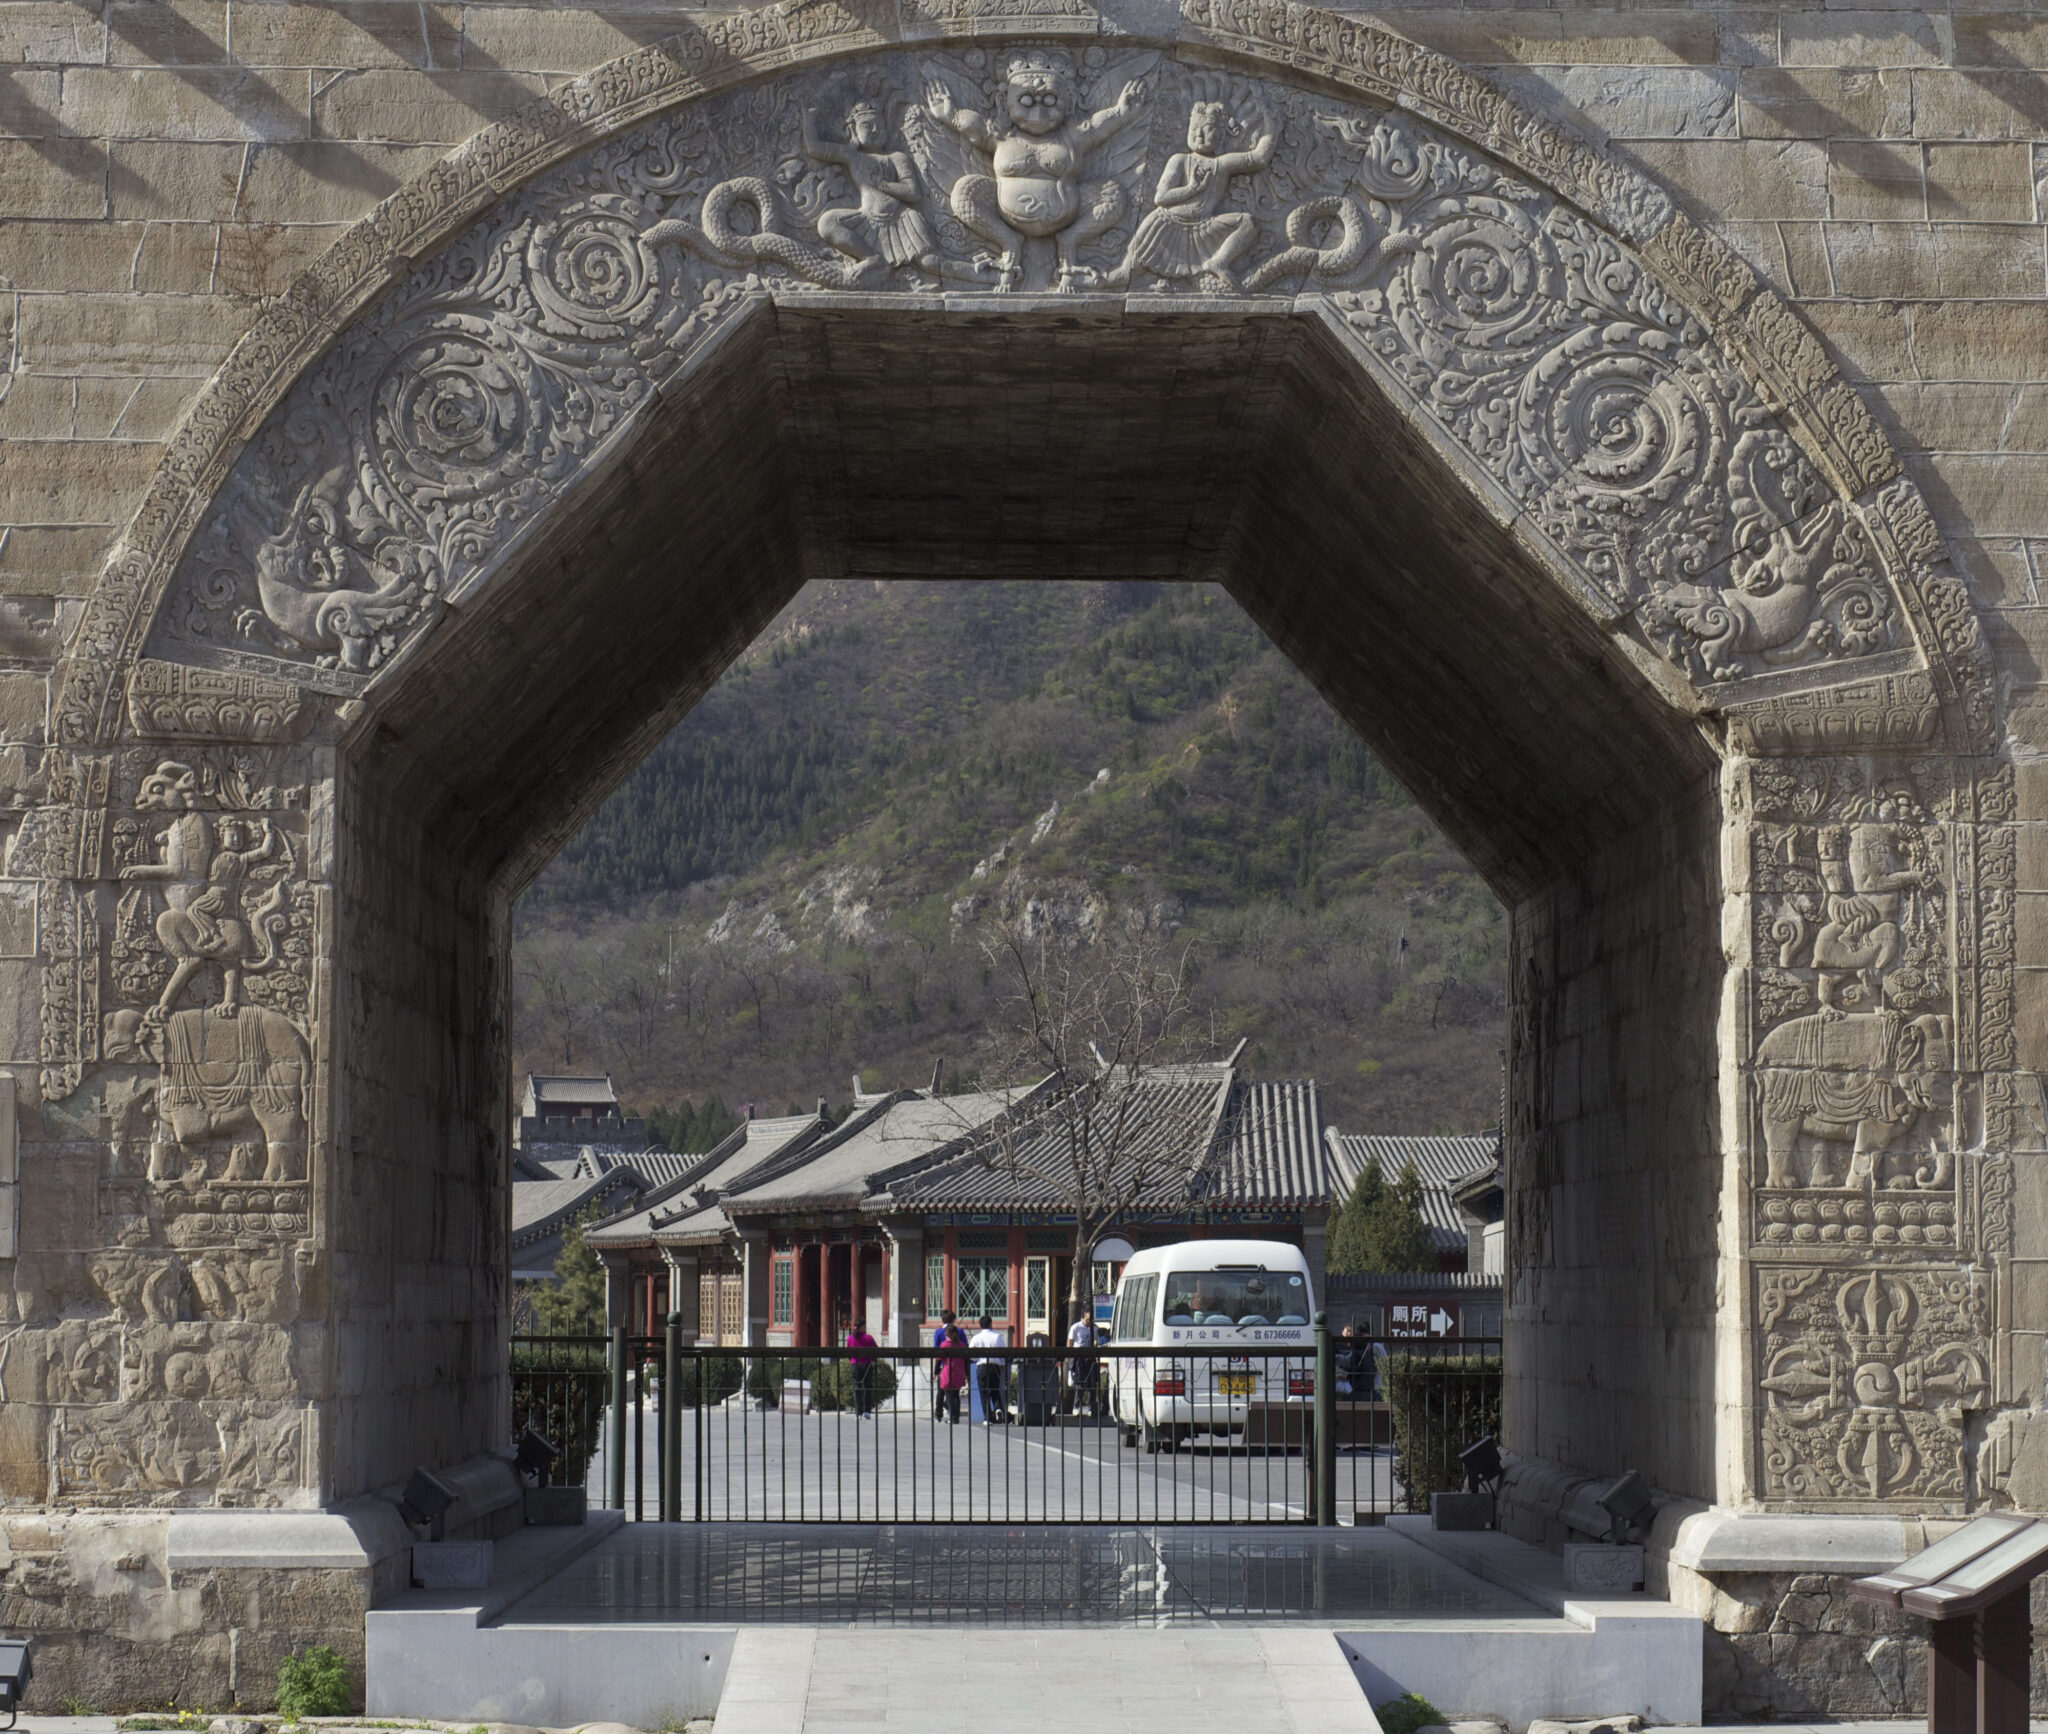 Monumental stone arch decorated with garuda, snake deities, scrollwork, mythical creatures, animals, and crossed vajras